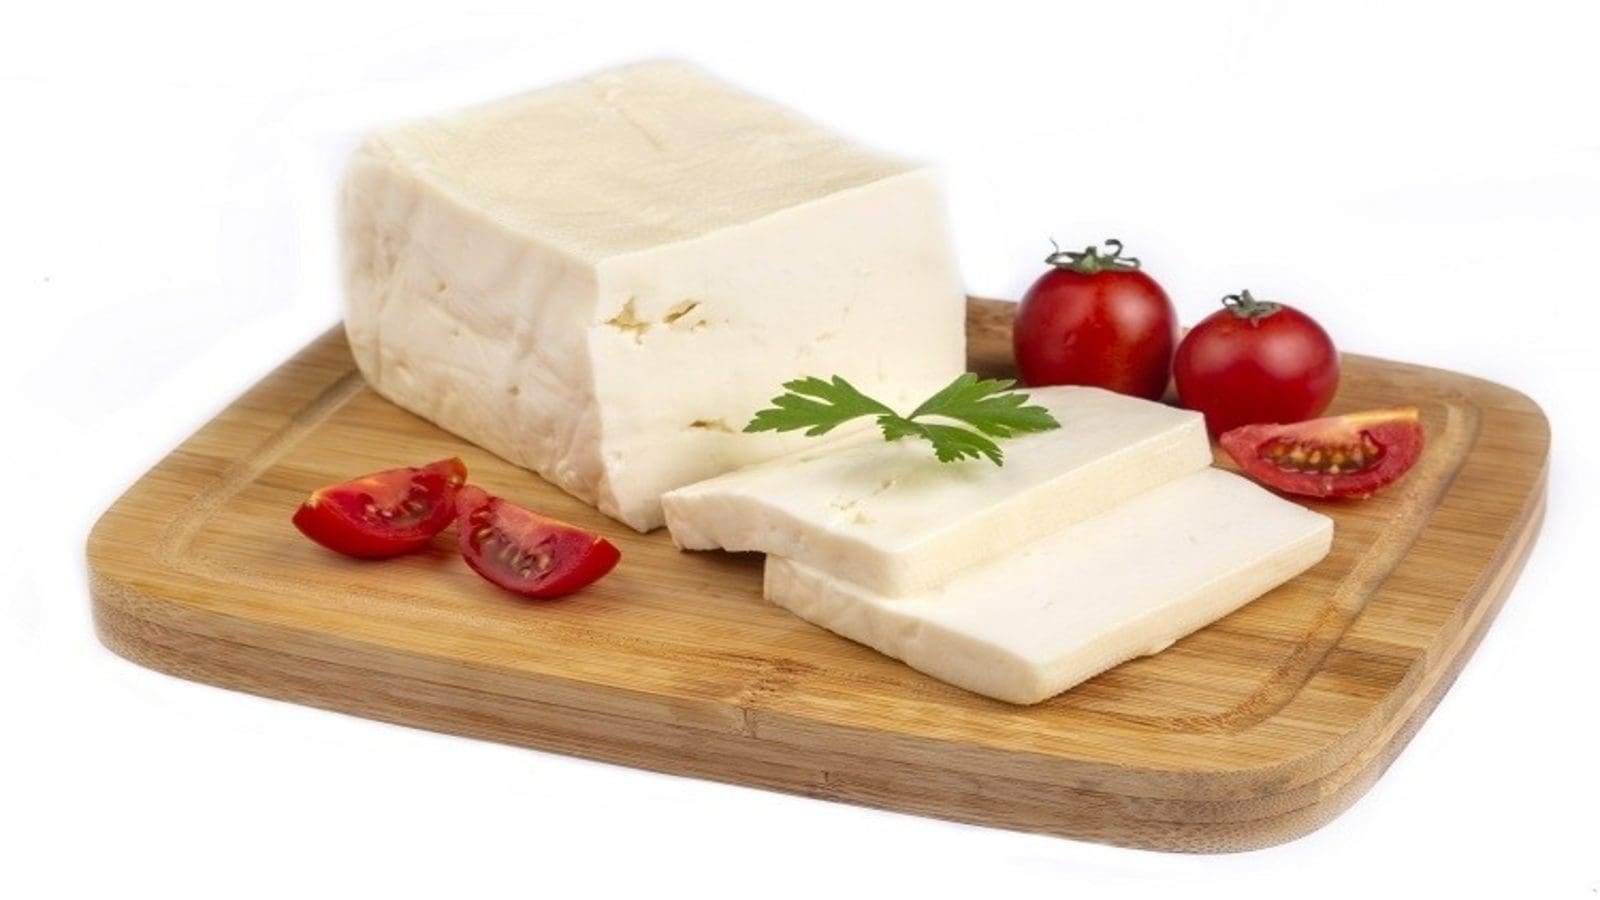 Turkey bans the production and sale of vegan cheese alternatives